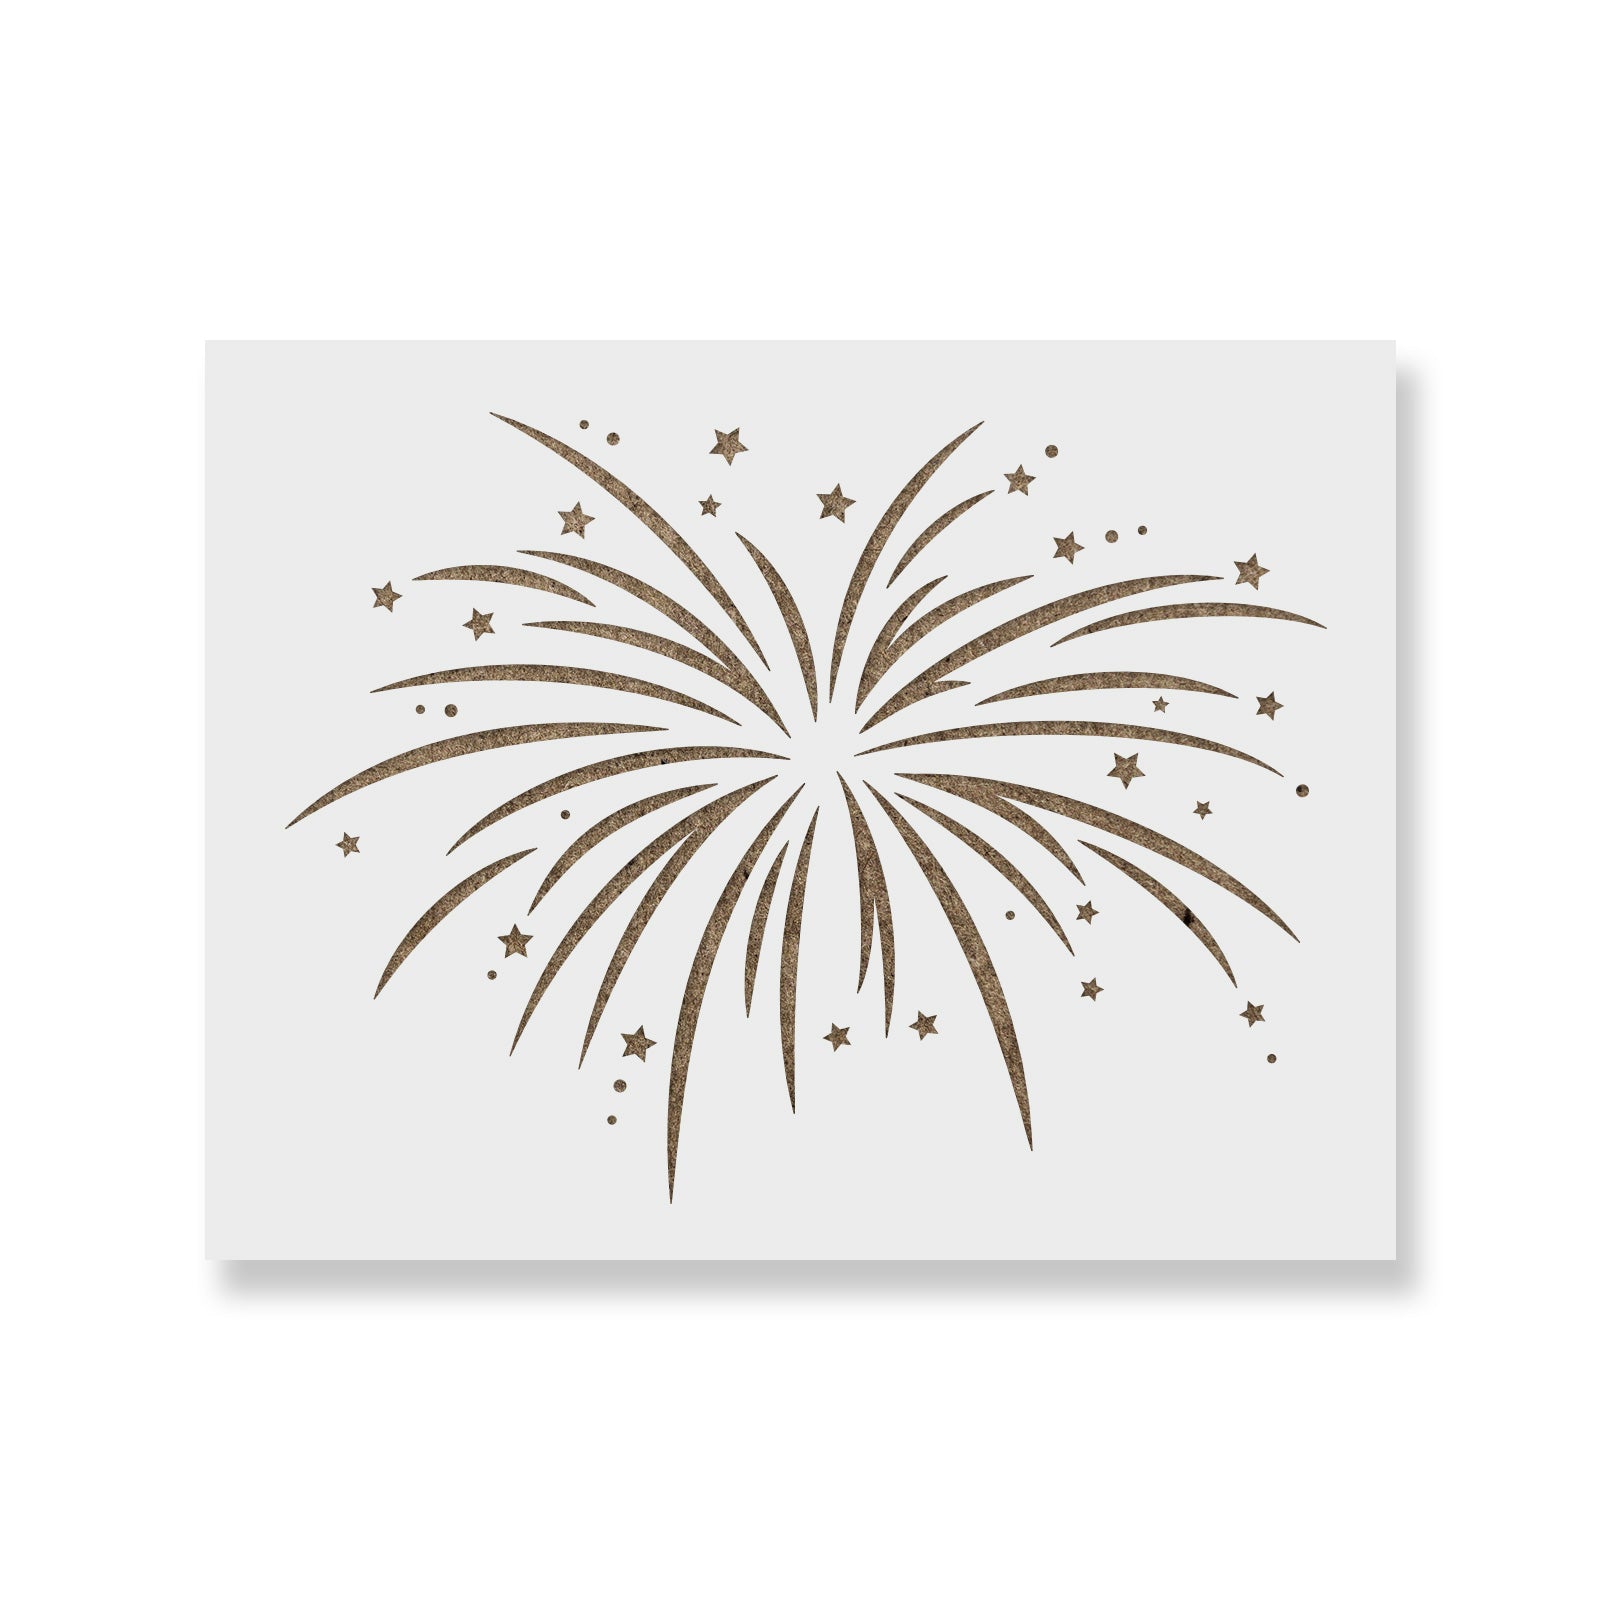 Reusable Stencils for Painting,8Pcs A4 29cm Firework Festival Stencils for  Painting on Wood,Furniture Crafts,Canvas,Journaling,Wall,Home Decor